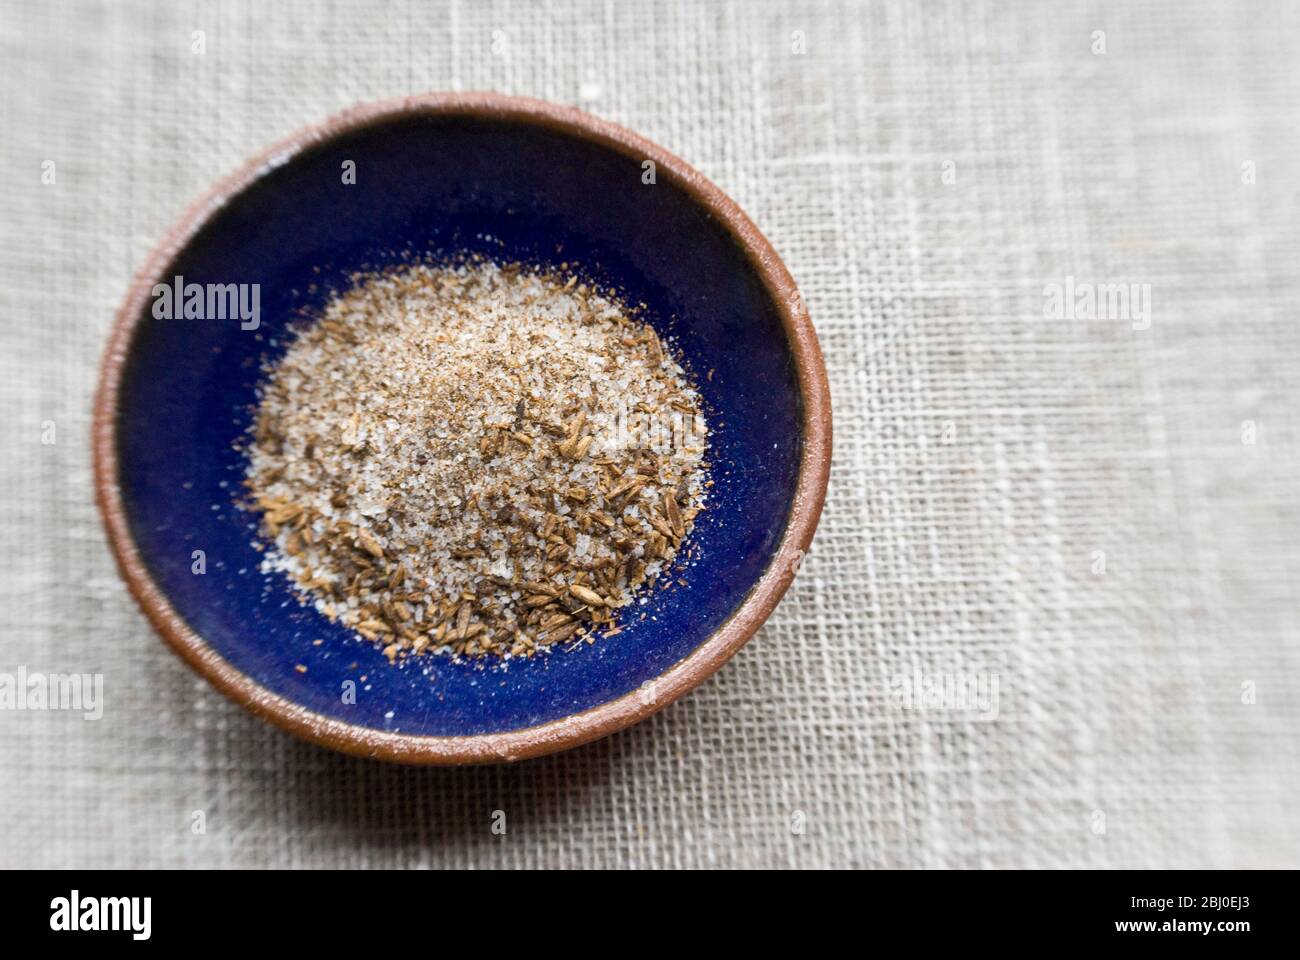 A mixture of sea salt and toasted, crushed cumin seeds, a popular seasoning for Morrocan food. - Stock Photo